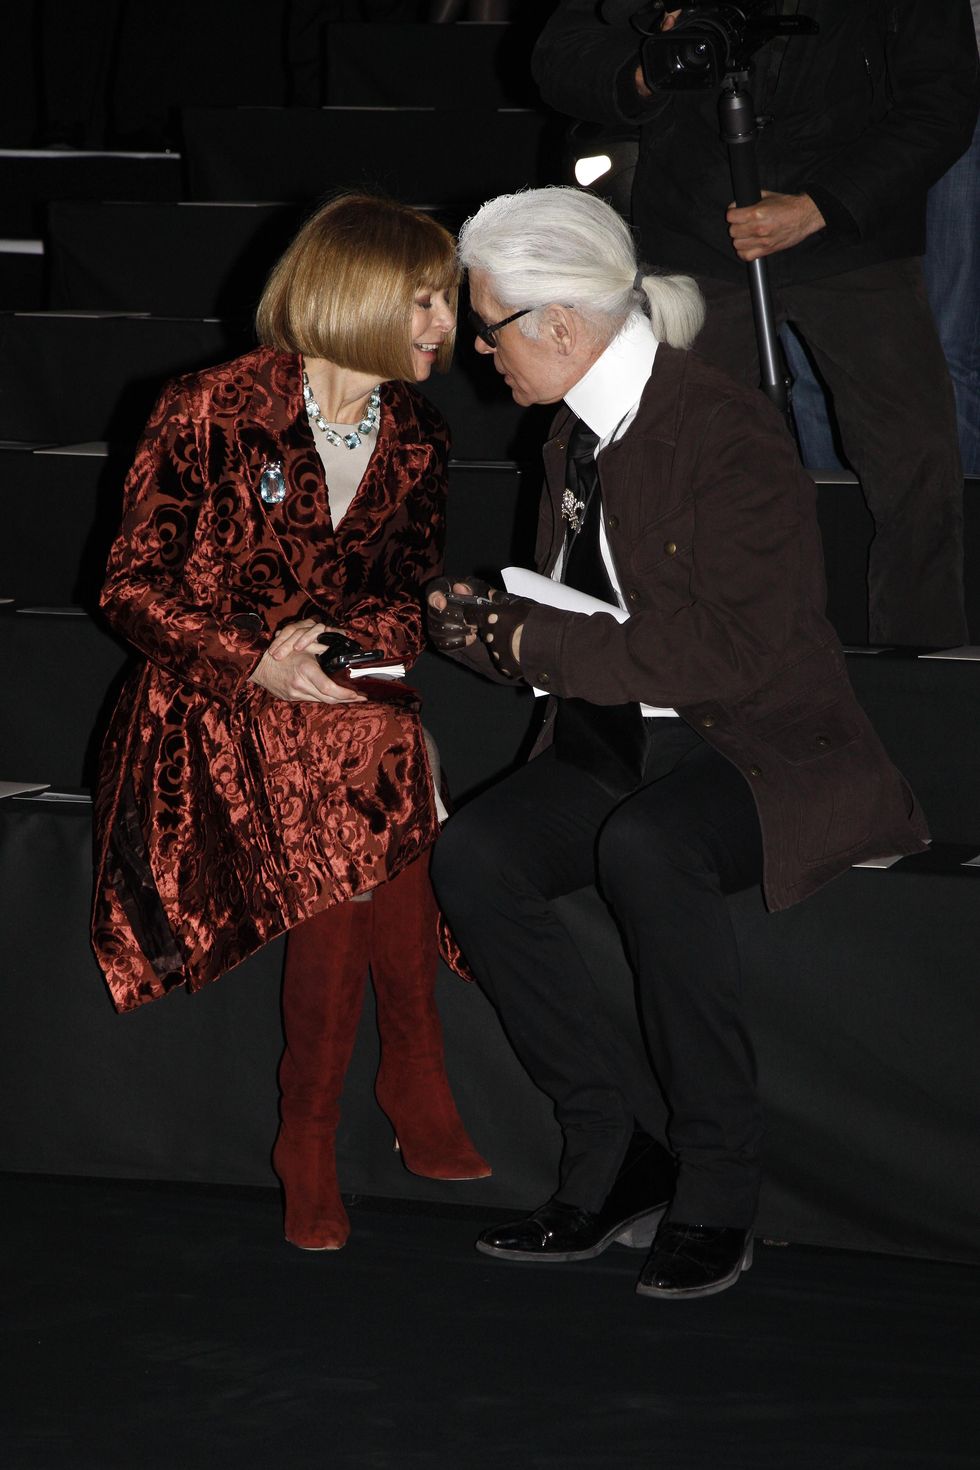 paris march 8 anna wintour and karl lagerfeld attend the karl lagerfeld ready to wear aw 2009 fashion show during paris fashion week at espace ephemere tuileries on march 8, 2009 in paris, france photo by michel dufourwireimage